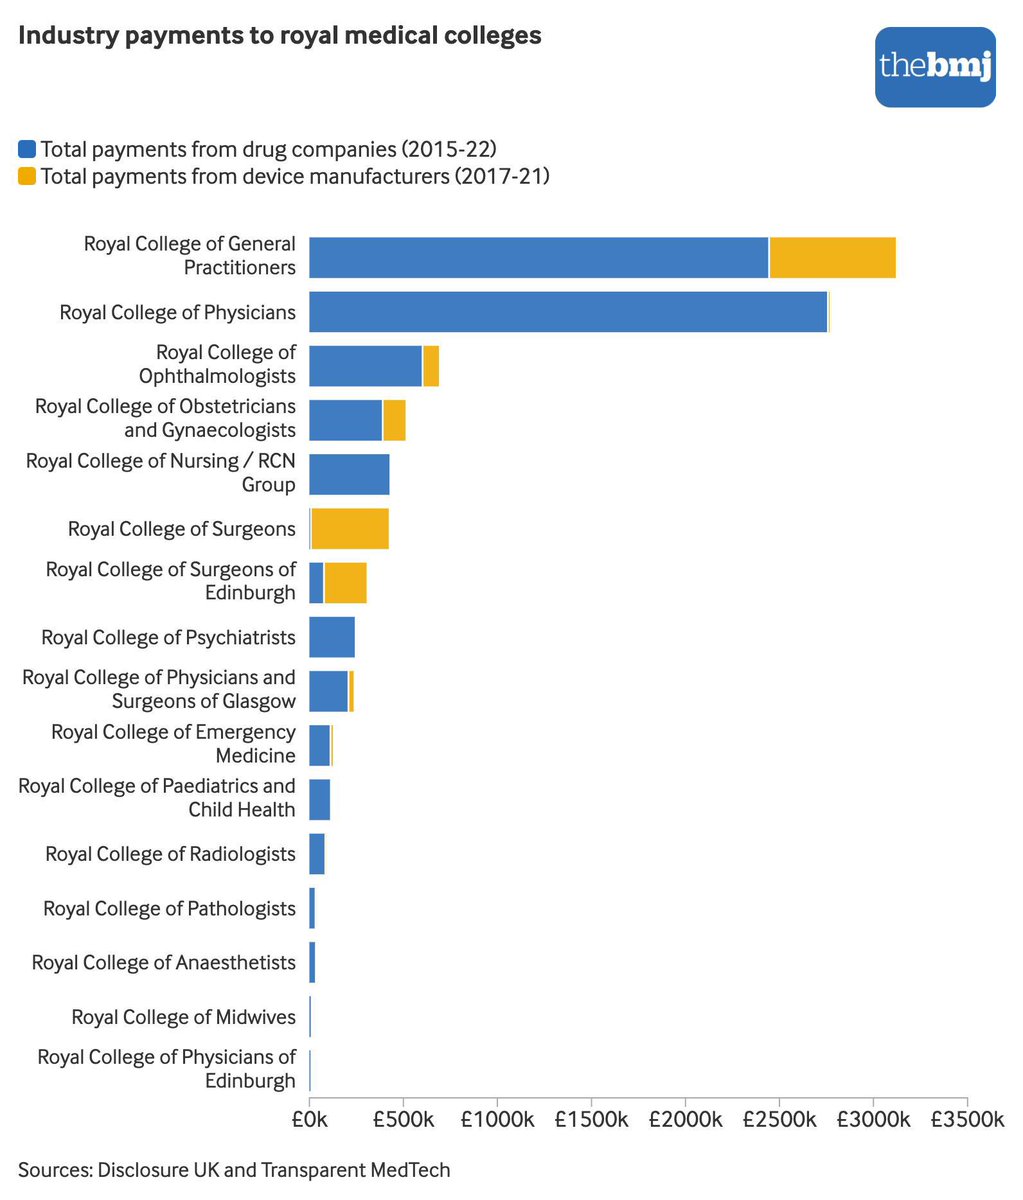 BREAKING BMJ INVESTIGATION: ‘Medical royal colleges receive MILLIONS from drug and medical device companies’ The Royal College of GPs & Royal College of Physicians top the list ‘The biggest donor overall was PFIZER’ Totally unacceptable.I feel sick bmj.com/content/382/bm…